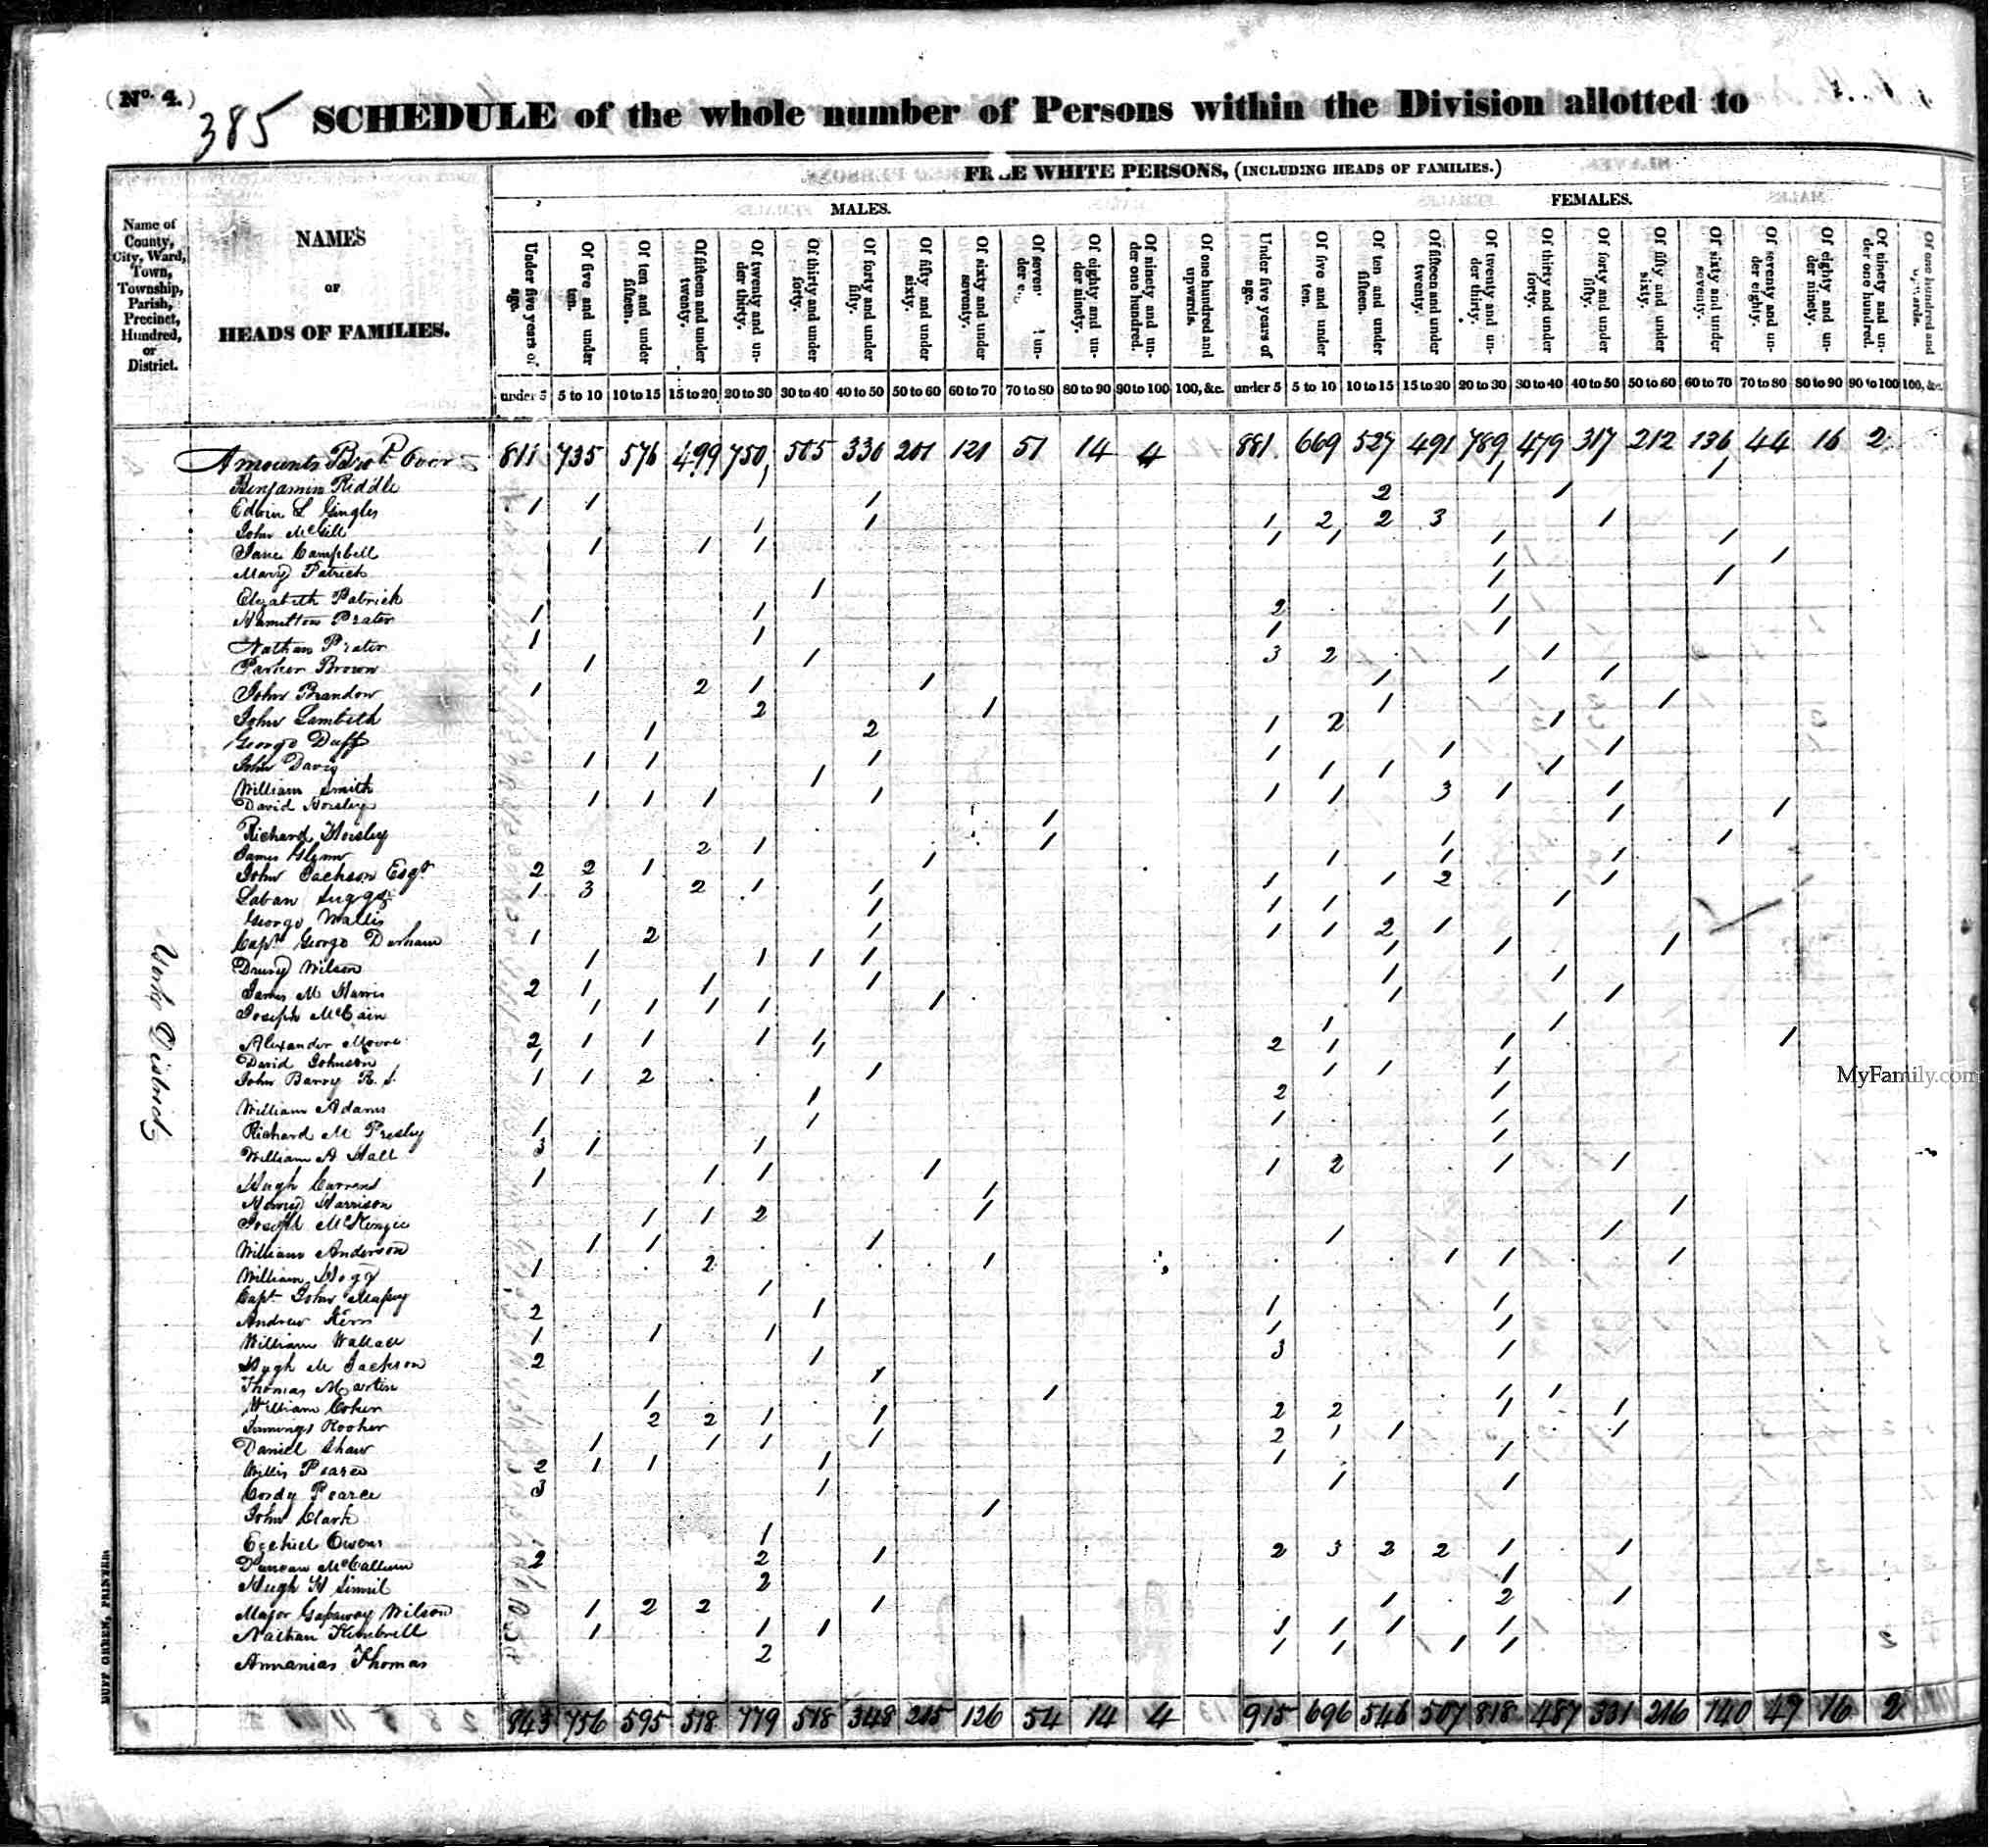 1830 FEDERAL CENSUS SHEET ON MR. KIMBRELL (Next to the last entry.)